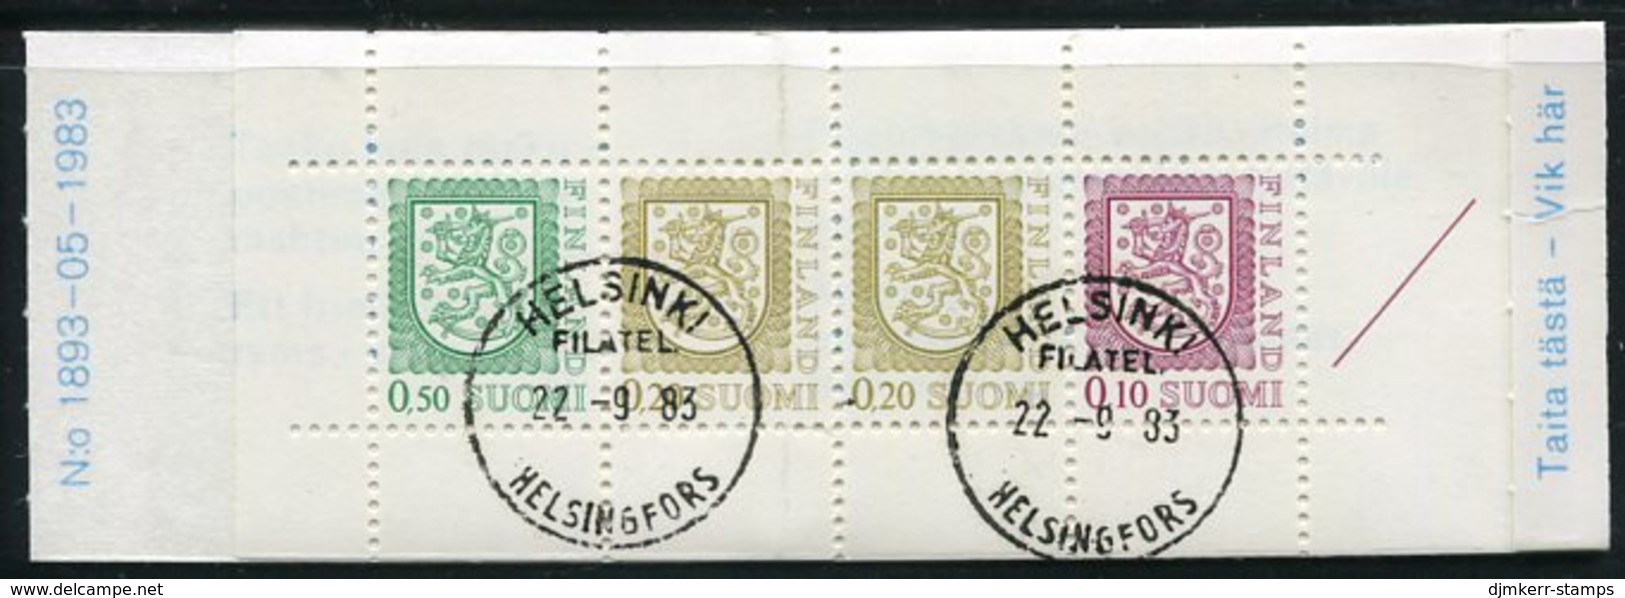 FINLAND 1983 Lion Definitive 1 Mk. Complete Booklet, Cancelled.  Michel MH 14 - Carnets